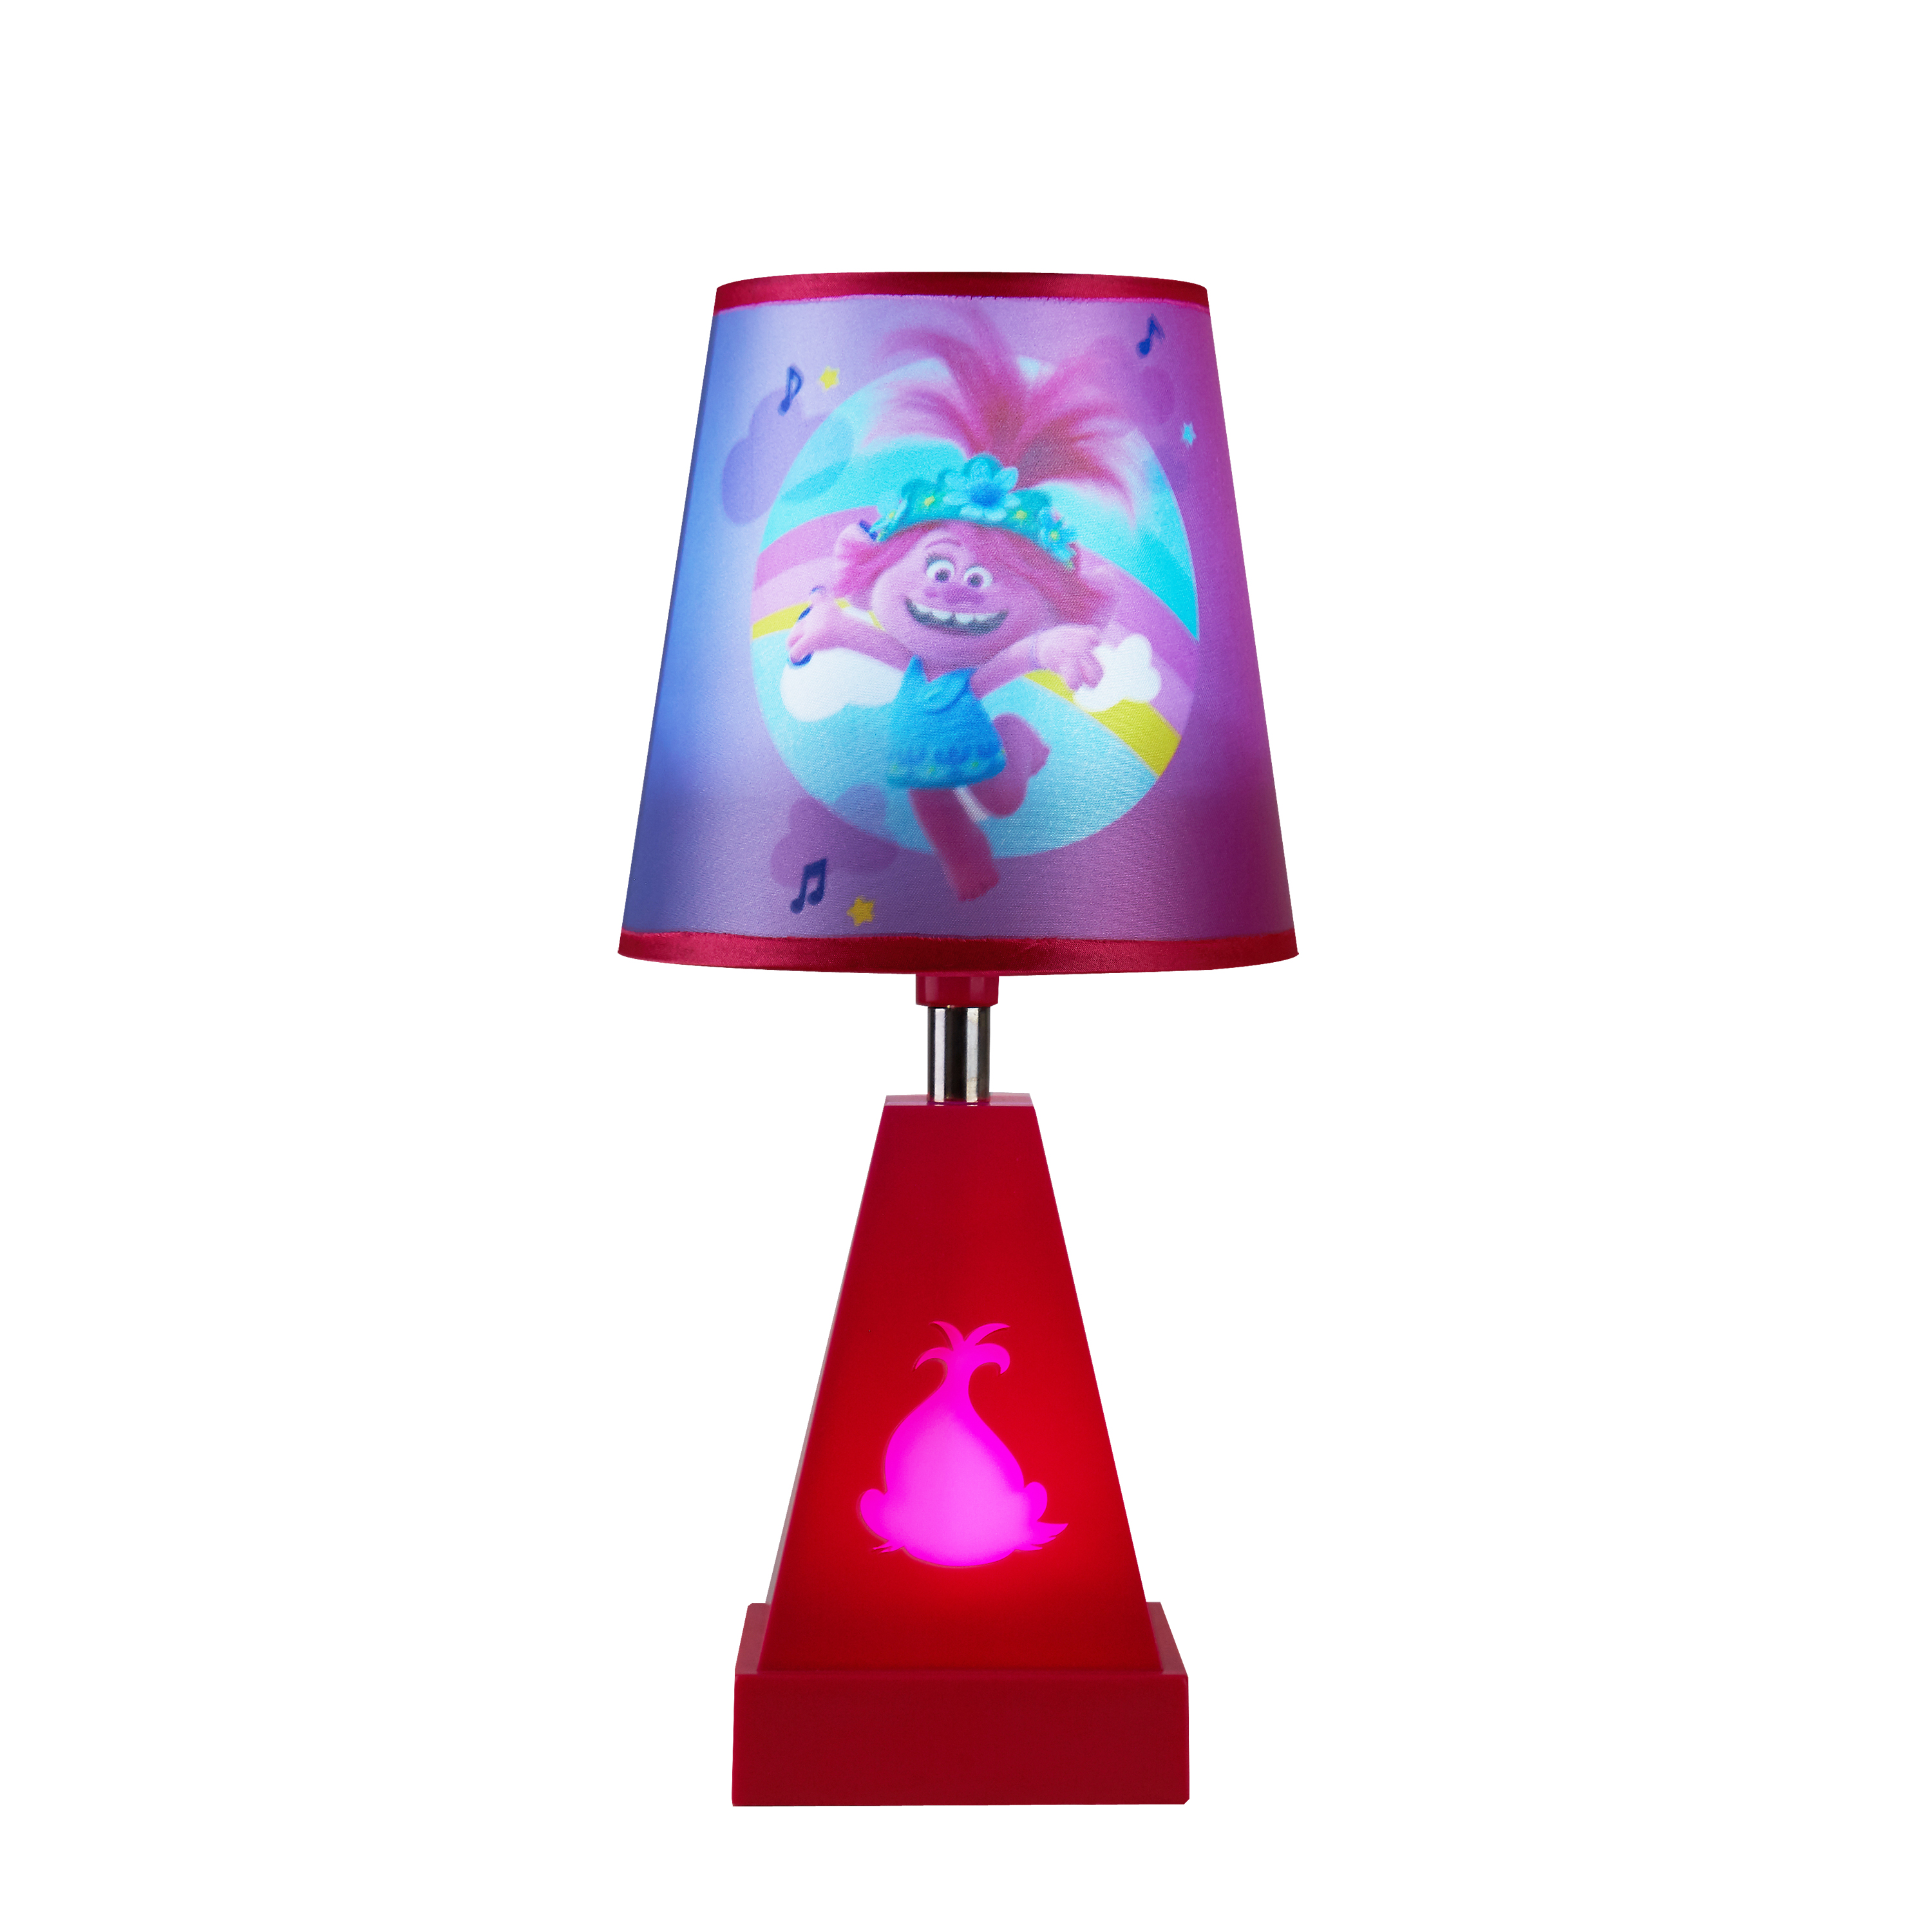 Dreamworks Trolls 2 in 1 Kids Lamp with Night Light - image 3 of 6